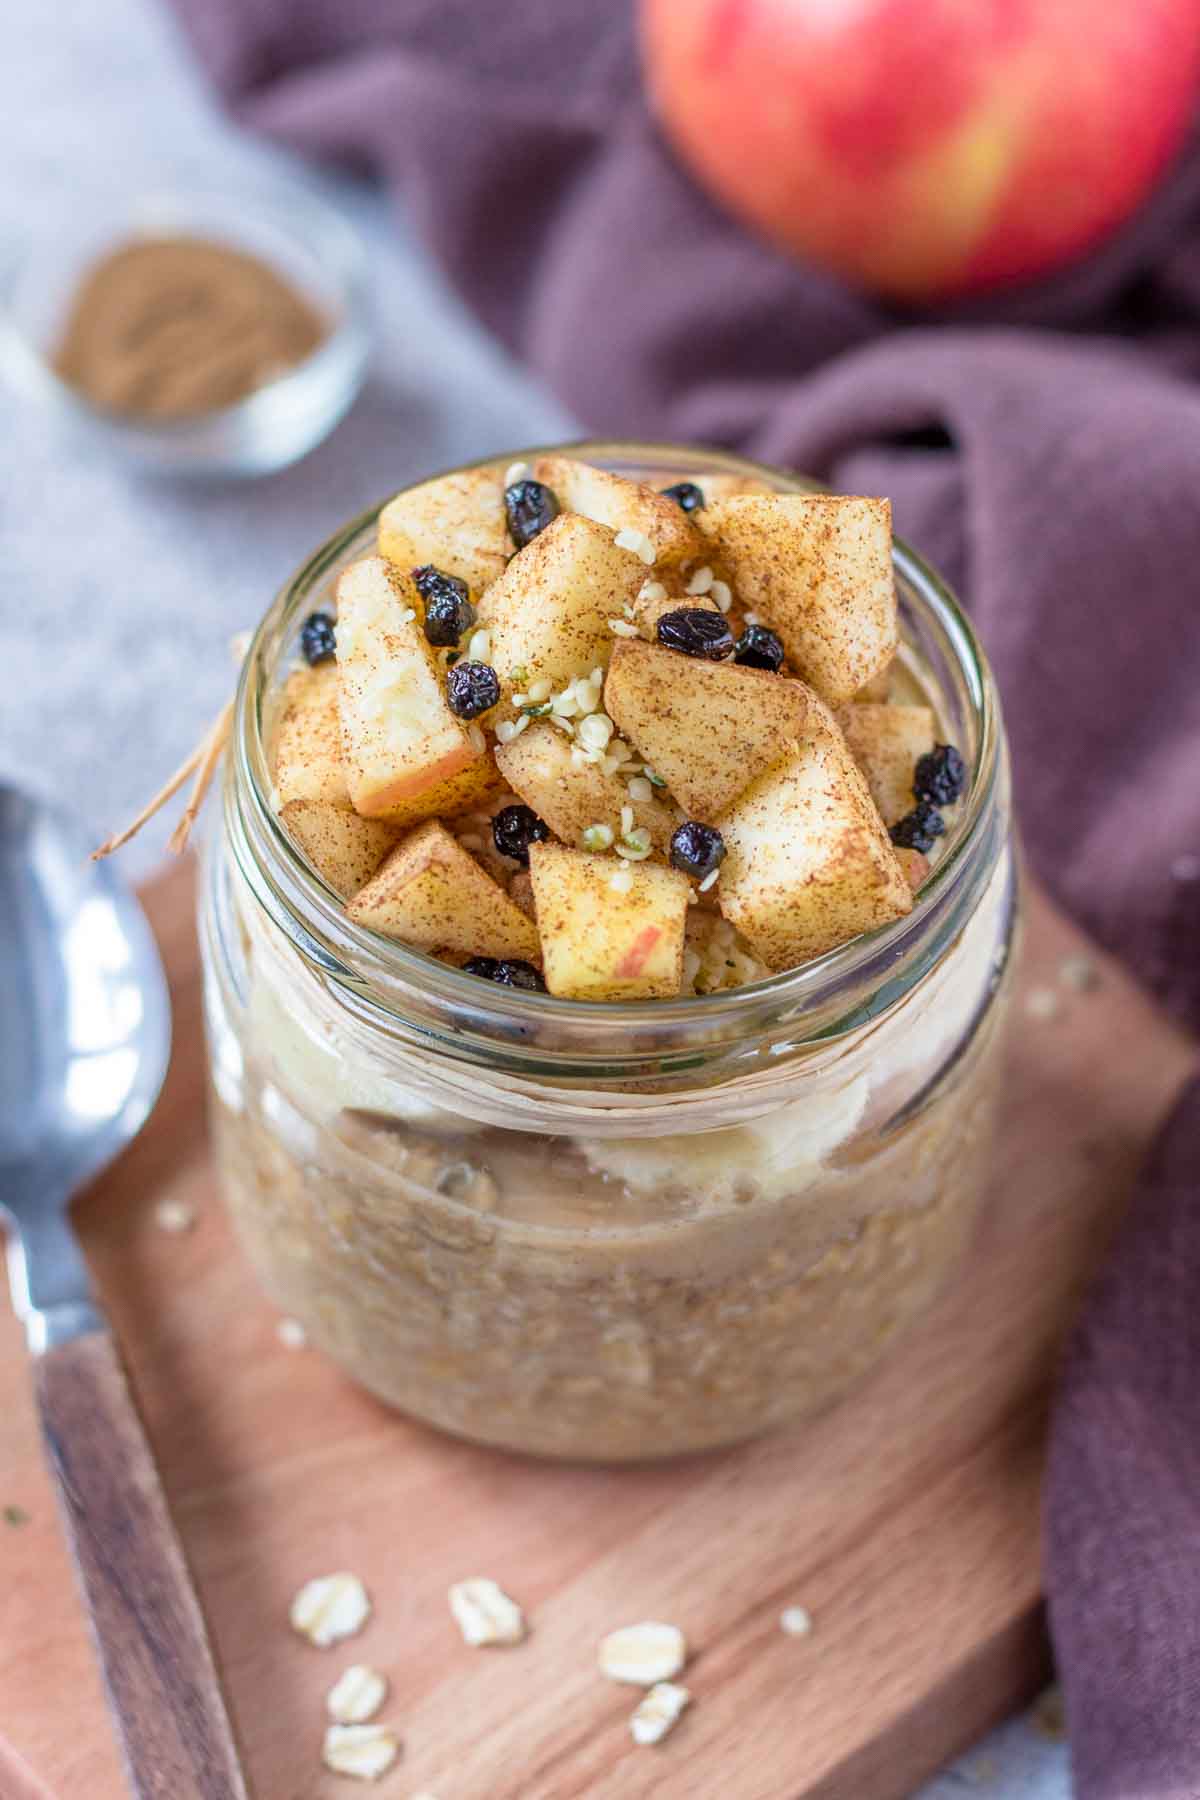 Apple and cinnamon overnight oats served in a jar